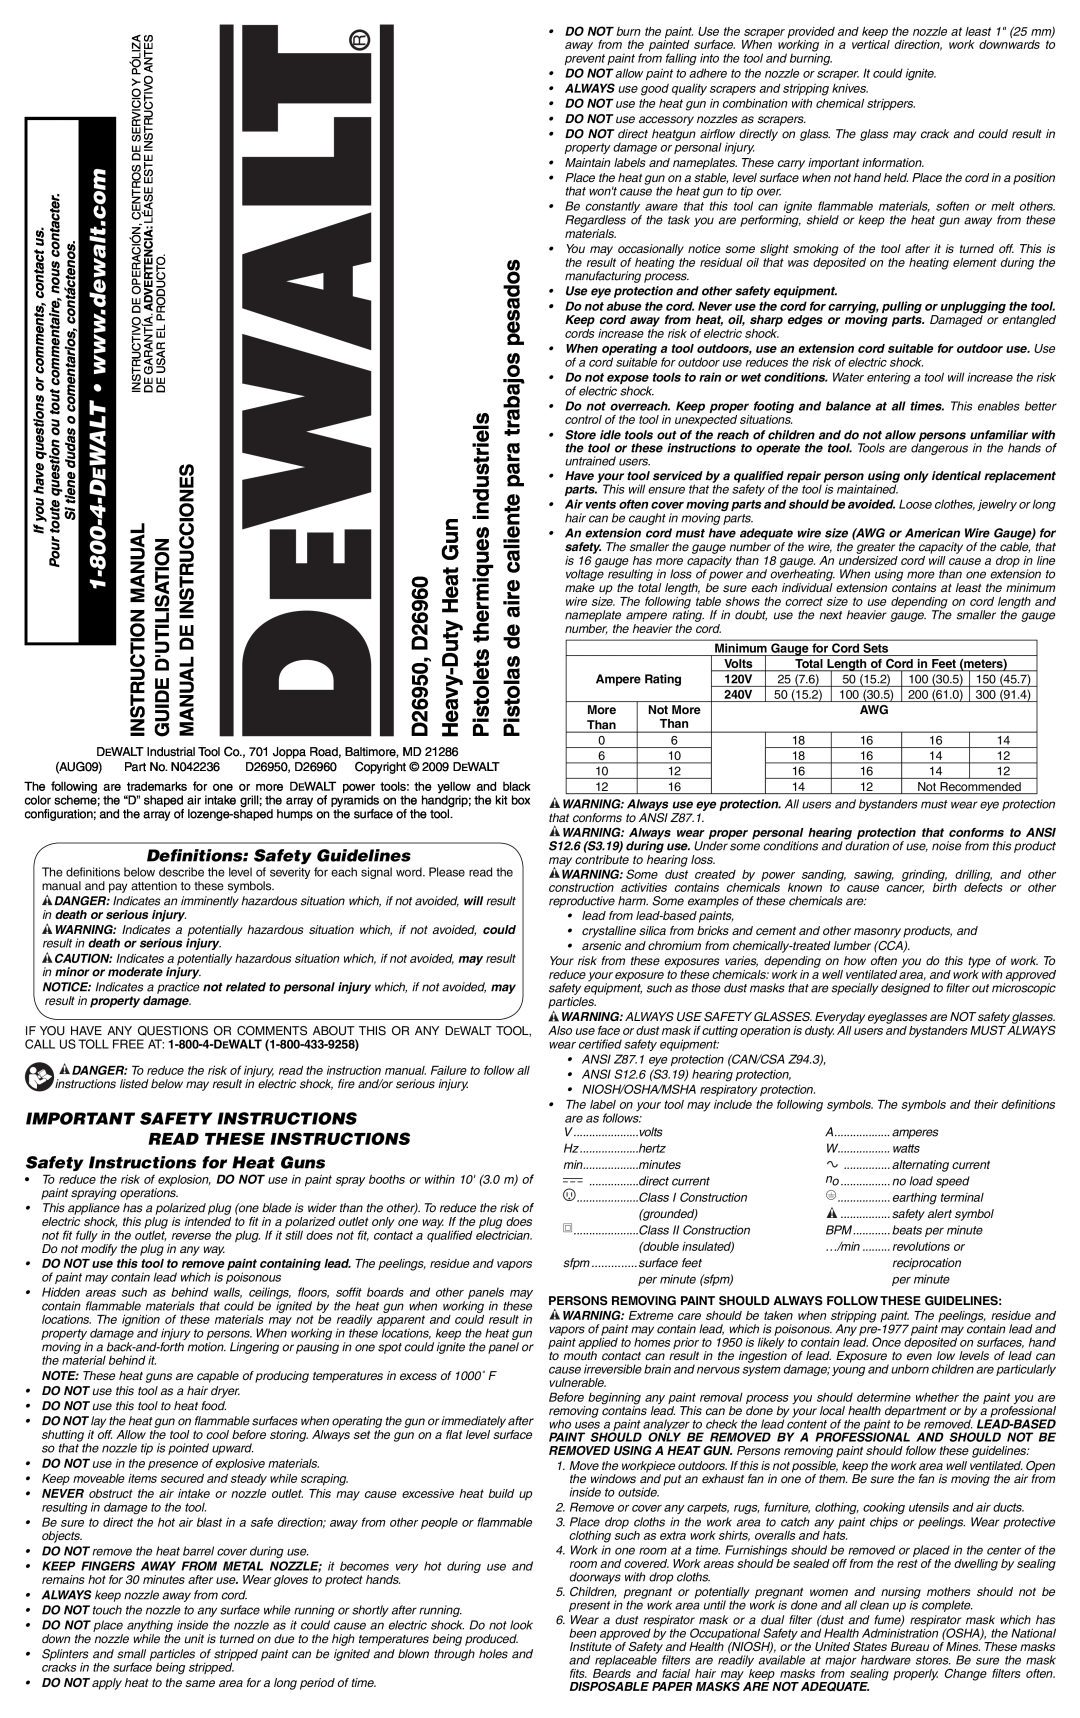 DeWalt D26950, D26960K instruction manual Instruccionesdemanual, Use eye protection and other safety equipment 